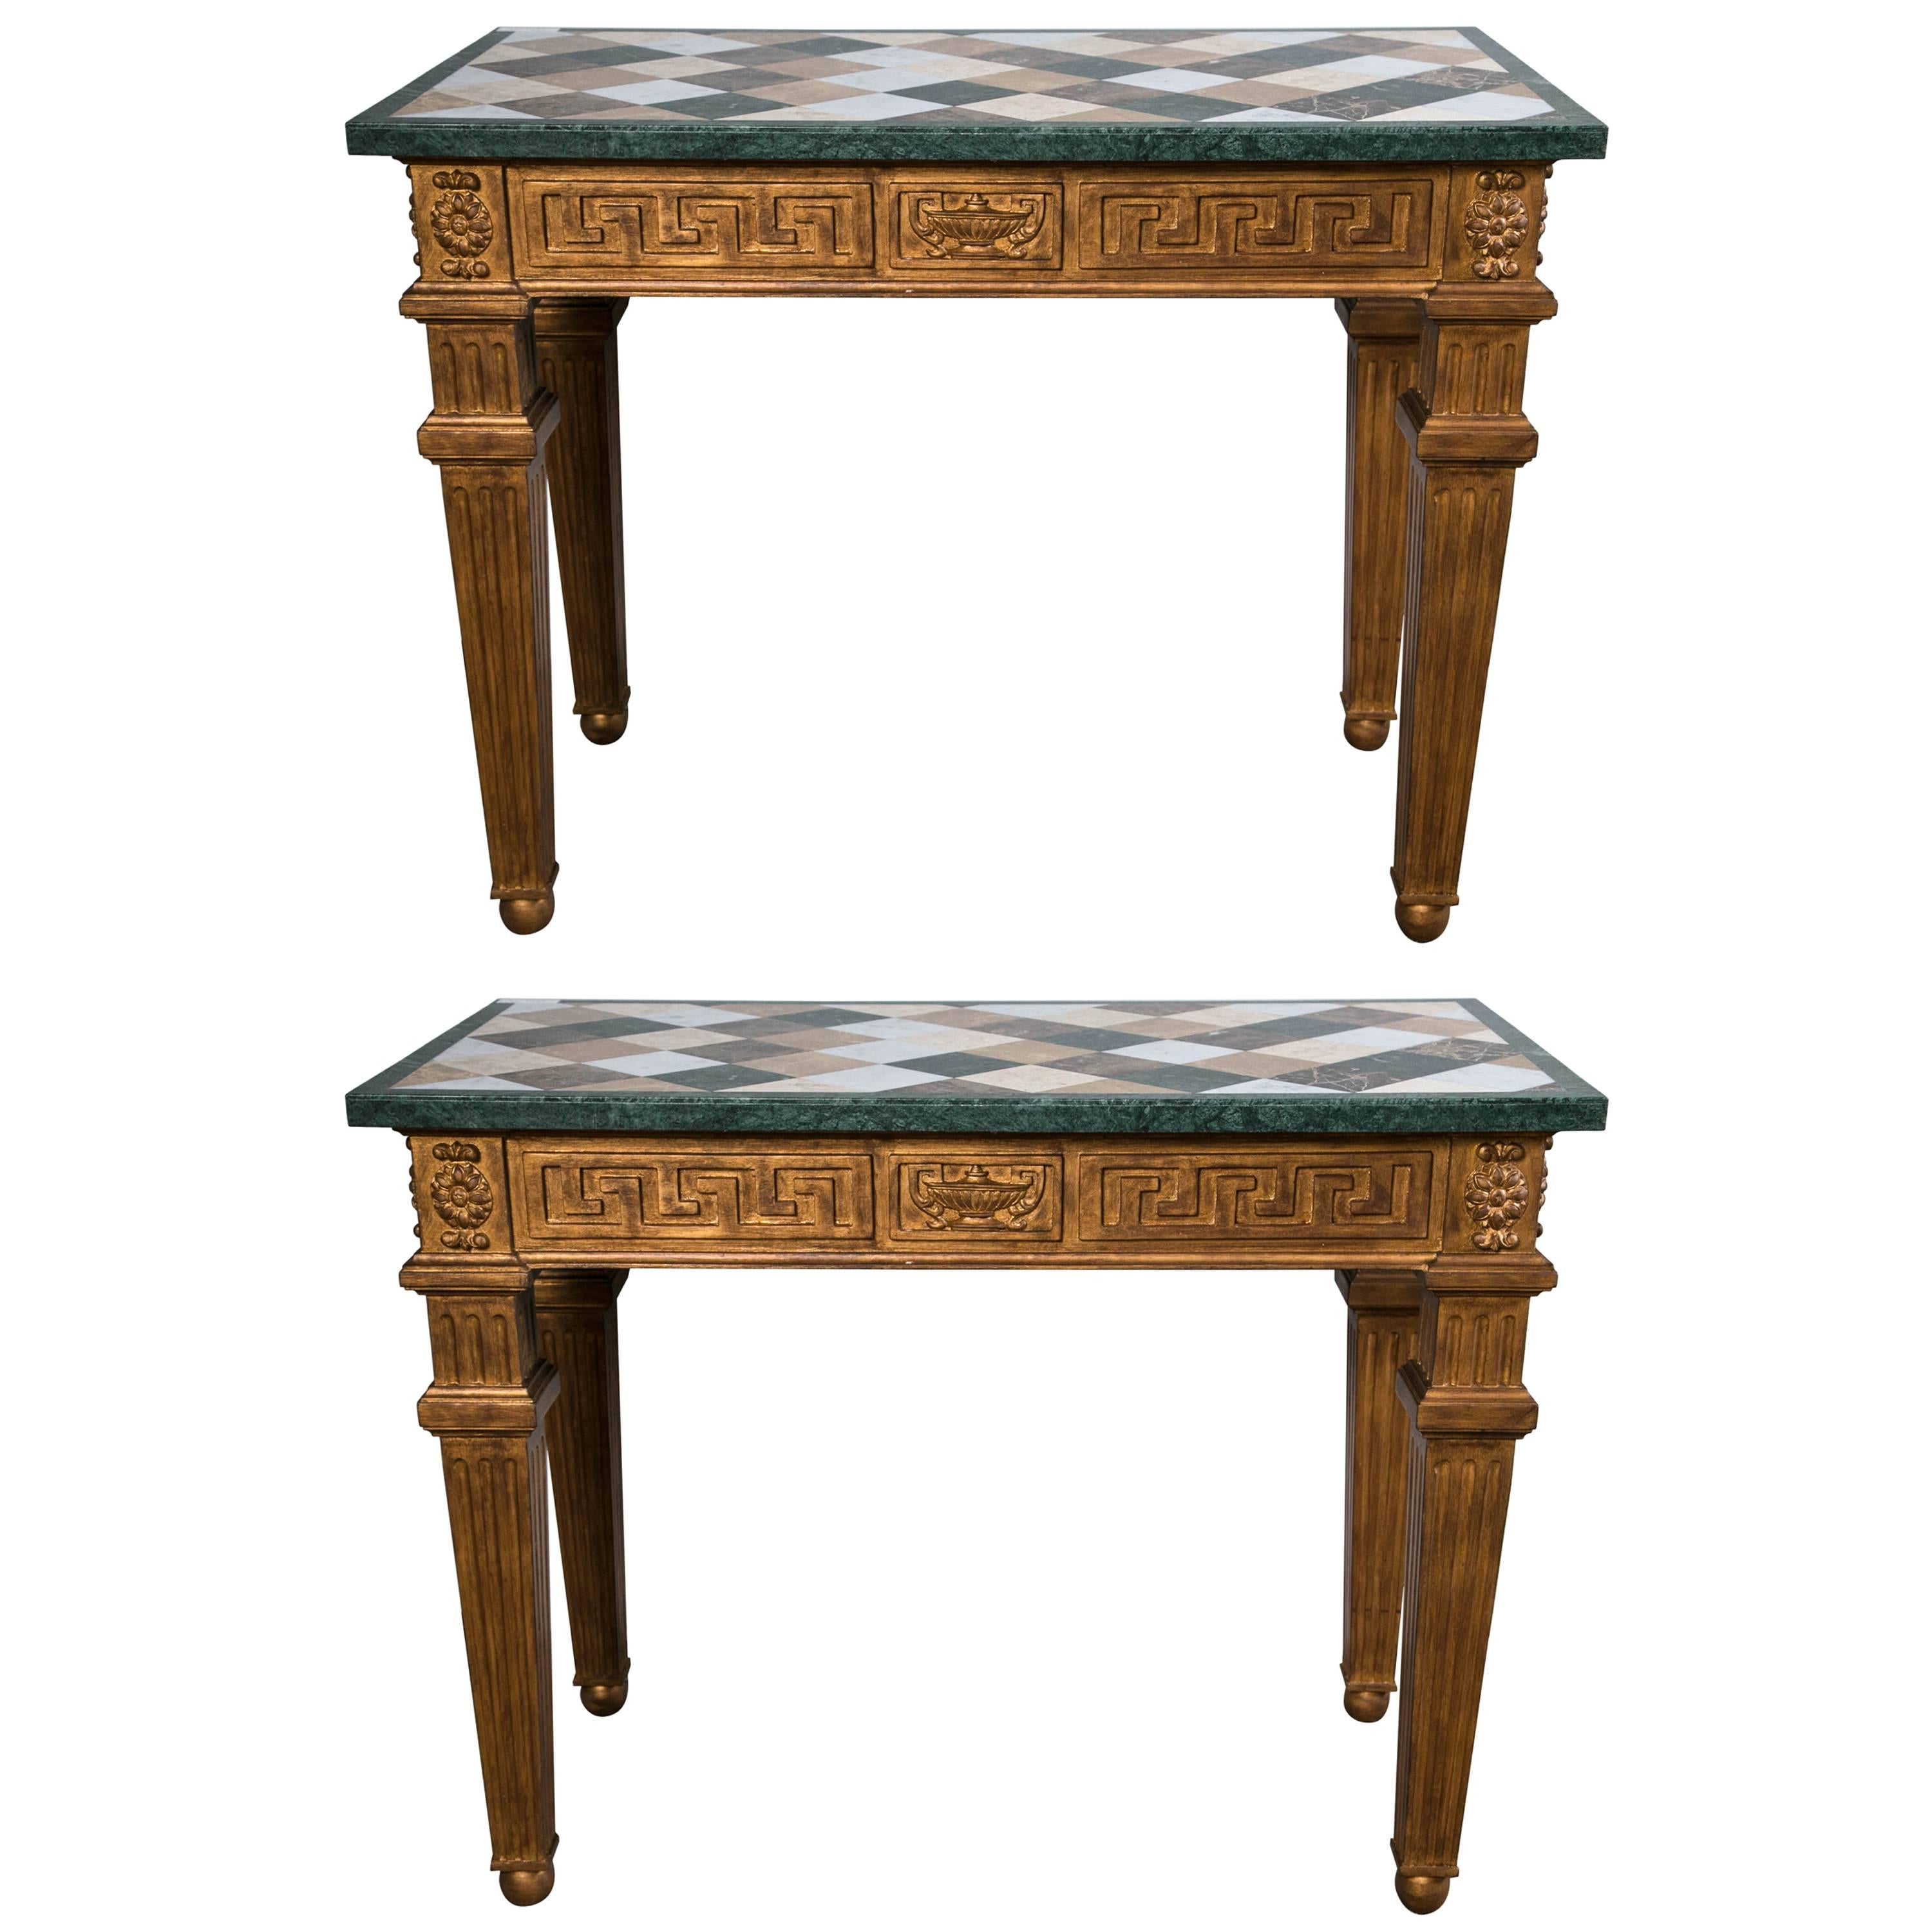 Pair of Neoclassical Style Marble-Top Greek Key Design Console Tables